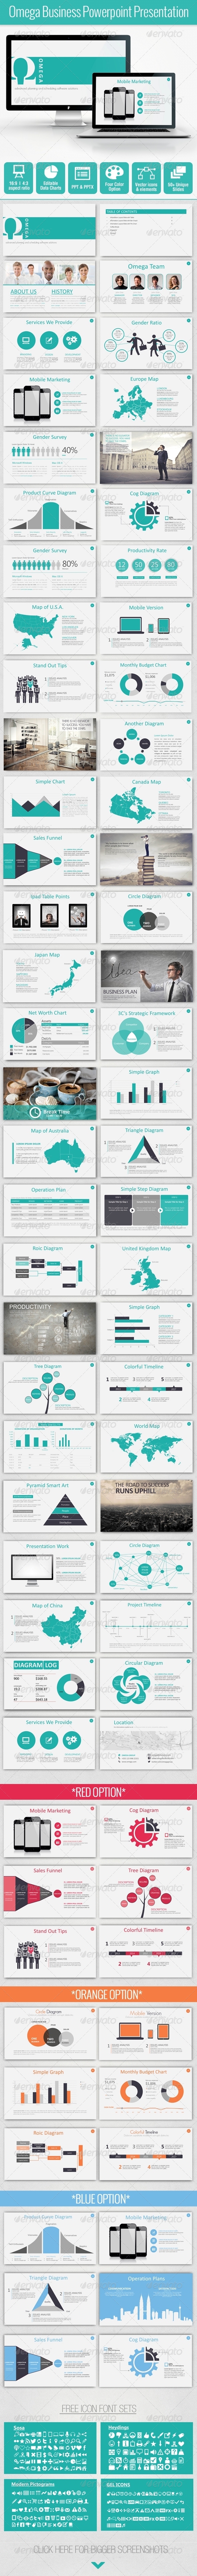 GraphicRiver Omega Bussiness Powerpoint Template 7517275